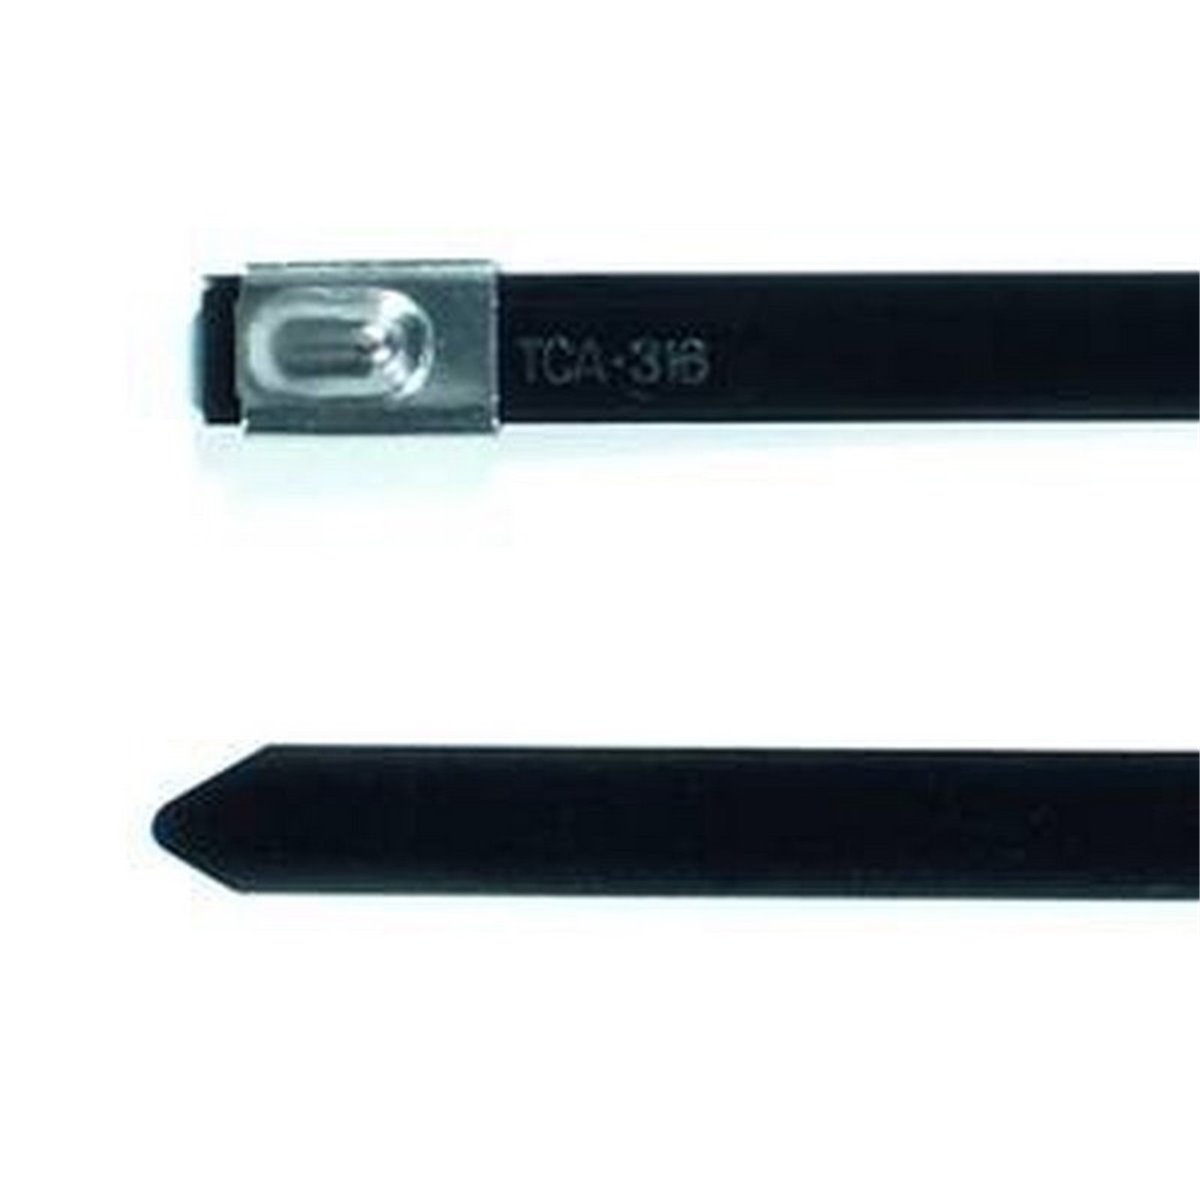 Stainless steel cable tie 521x7,9 MBT20HC-316-SS/N11-B HellermannTyton